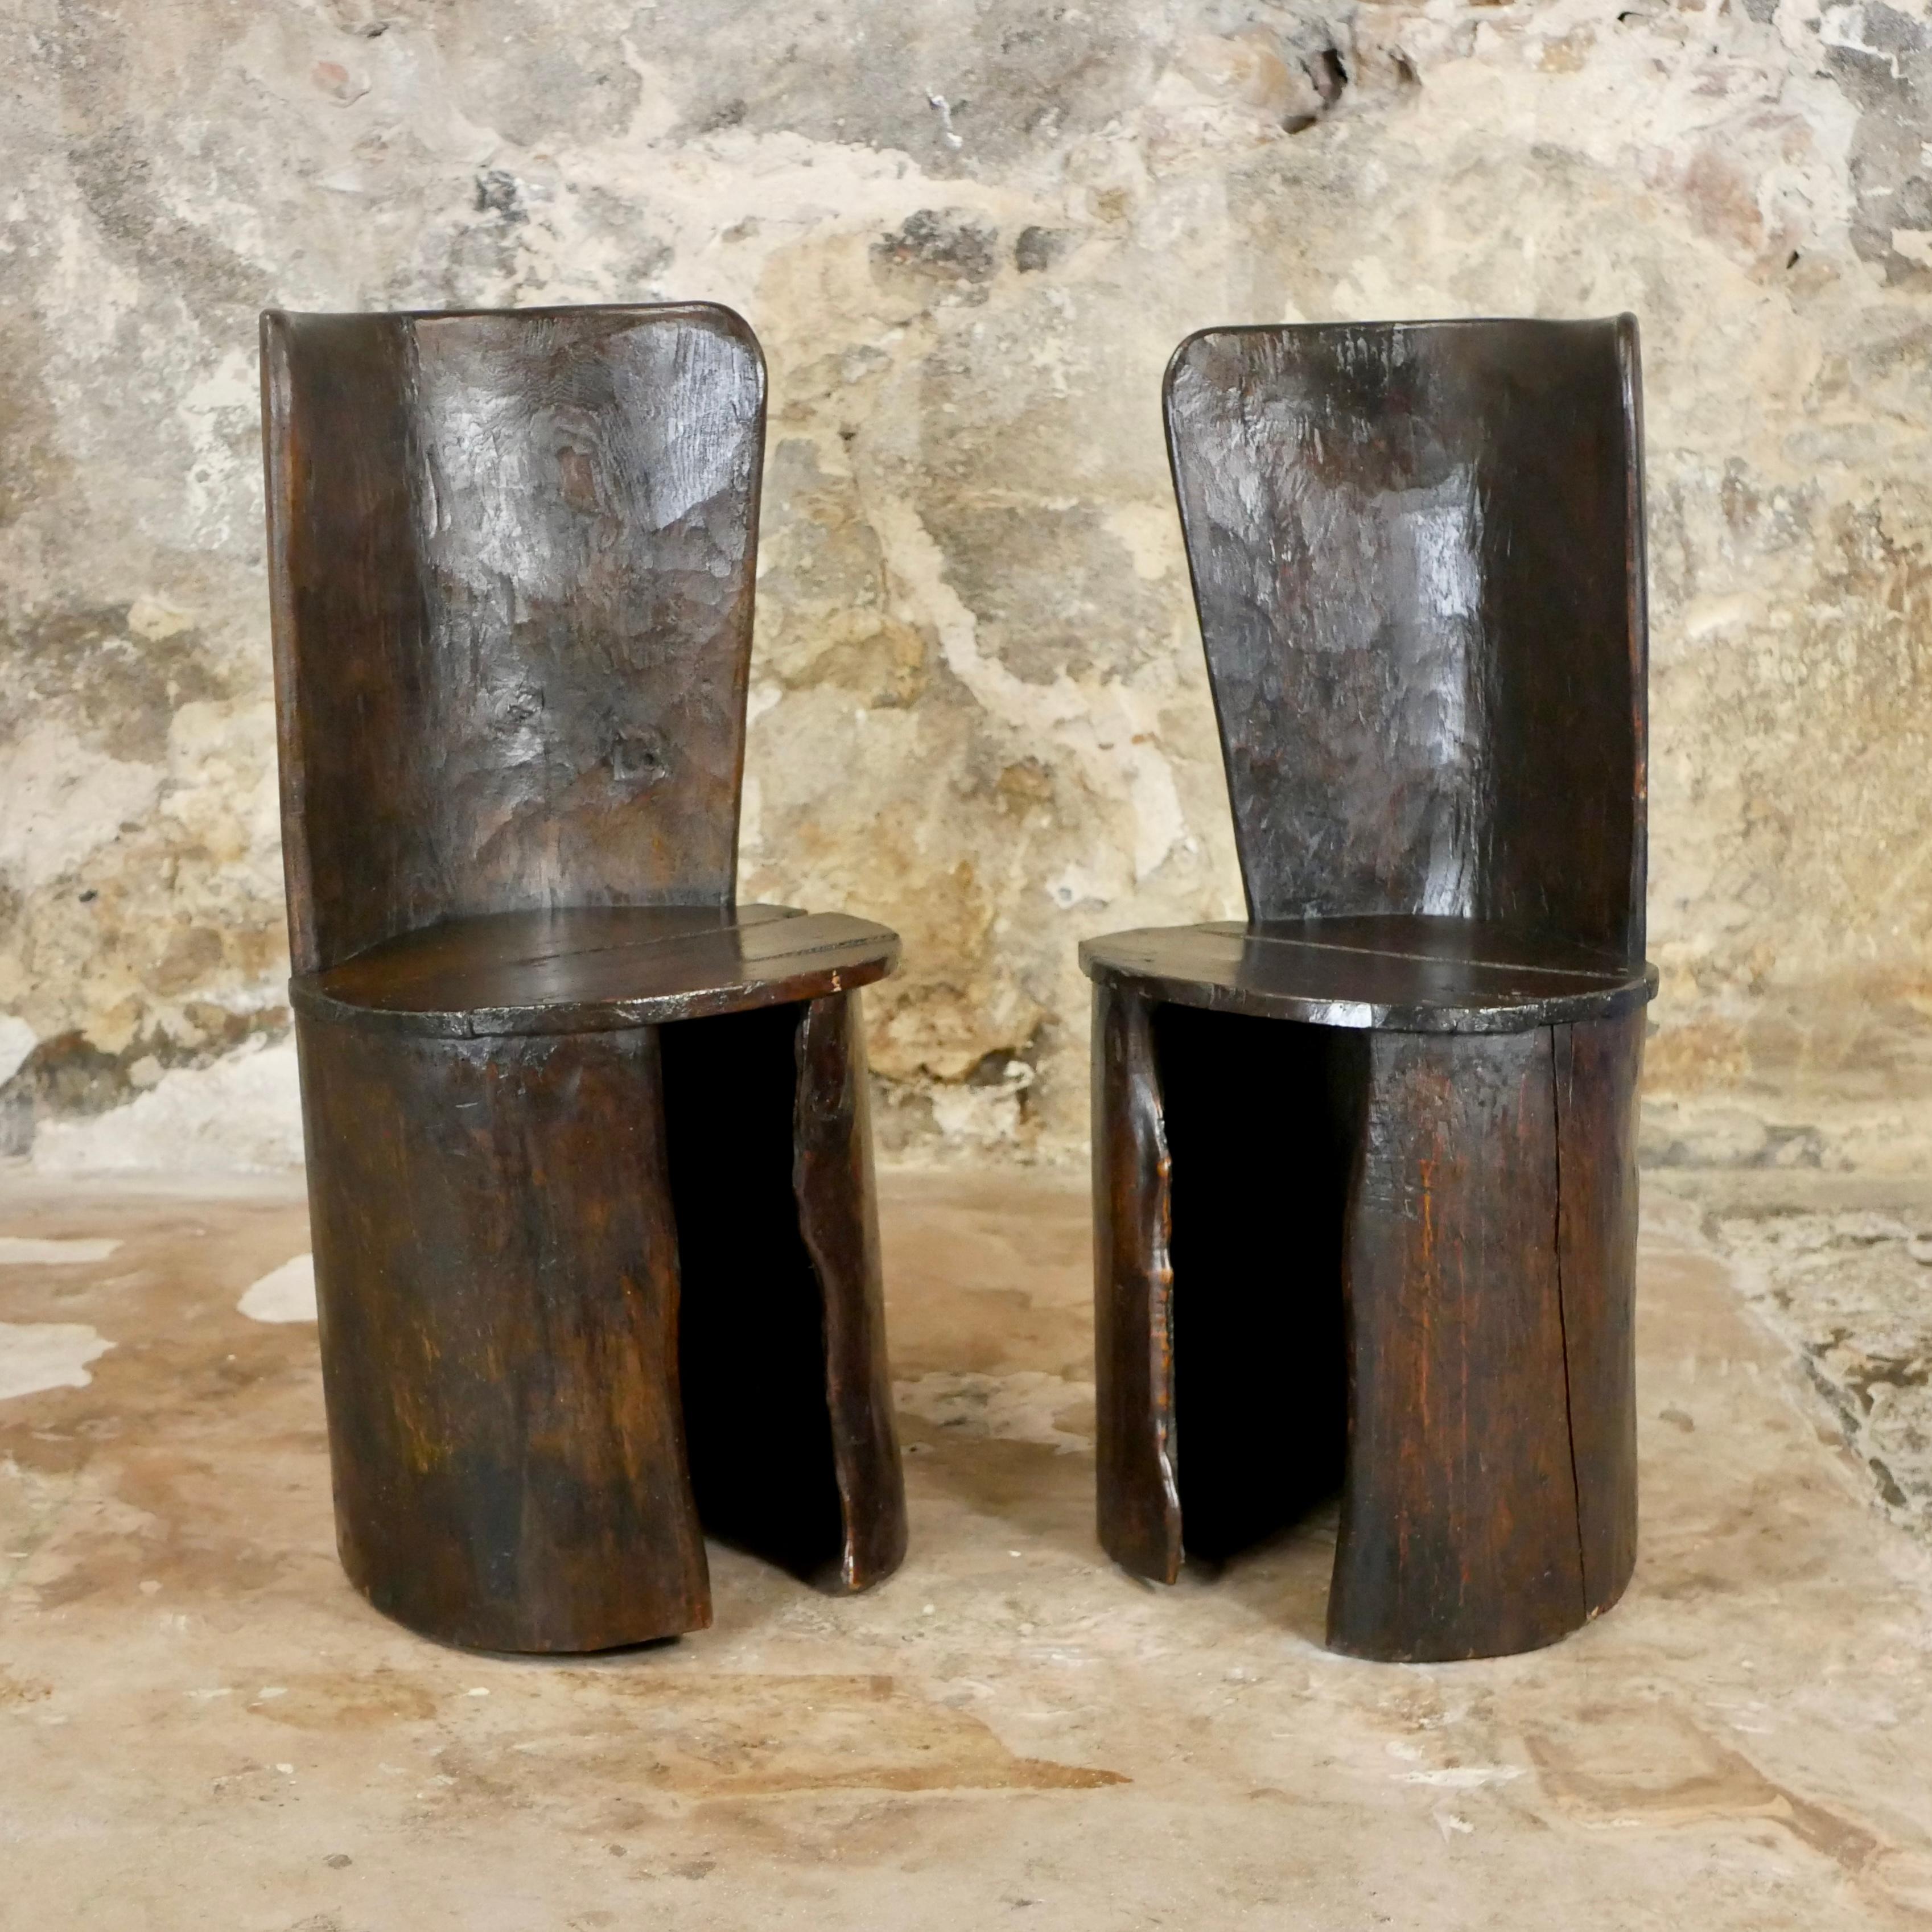 Stunning pair of trunk chairs, anonymous work from Finistère, Bretagne, in the far west of France. 
Made in the 1950s with local cherry trees.
Hand carved and assembled.
Very unique and adorable.
Beautiful wood grain and patina.
Traces of time : one